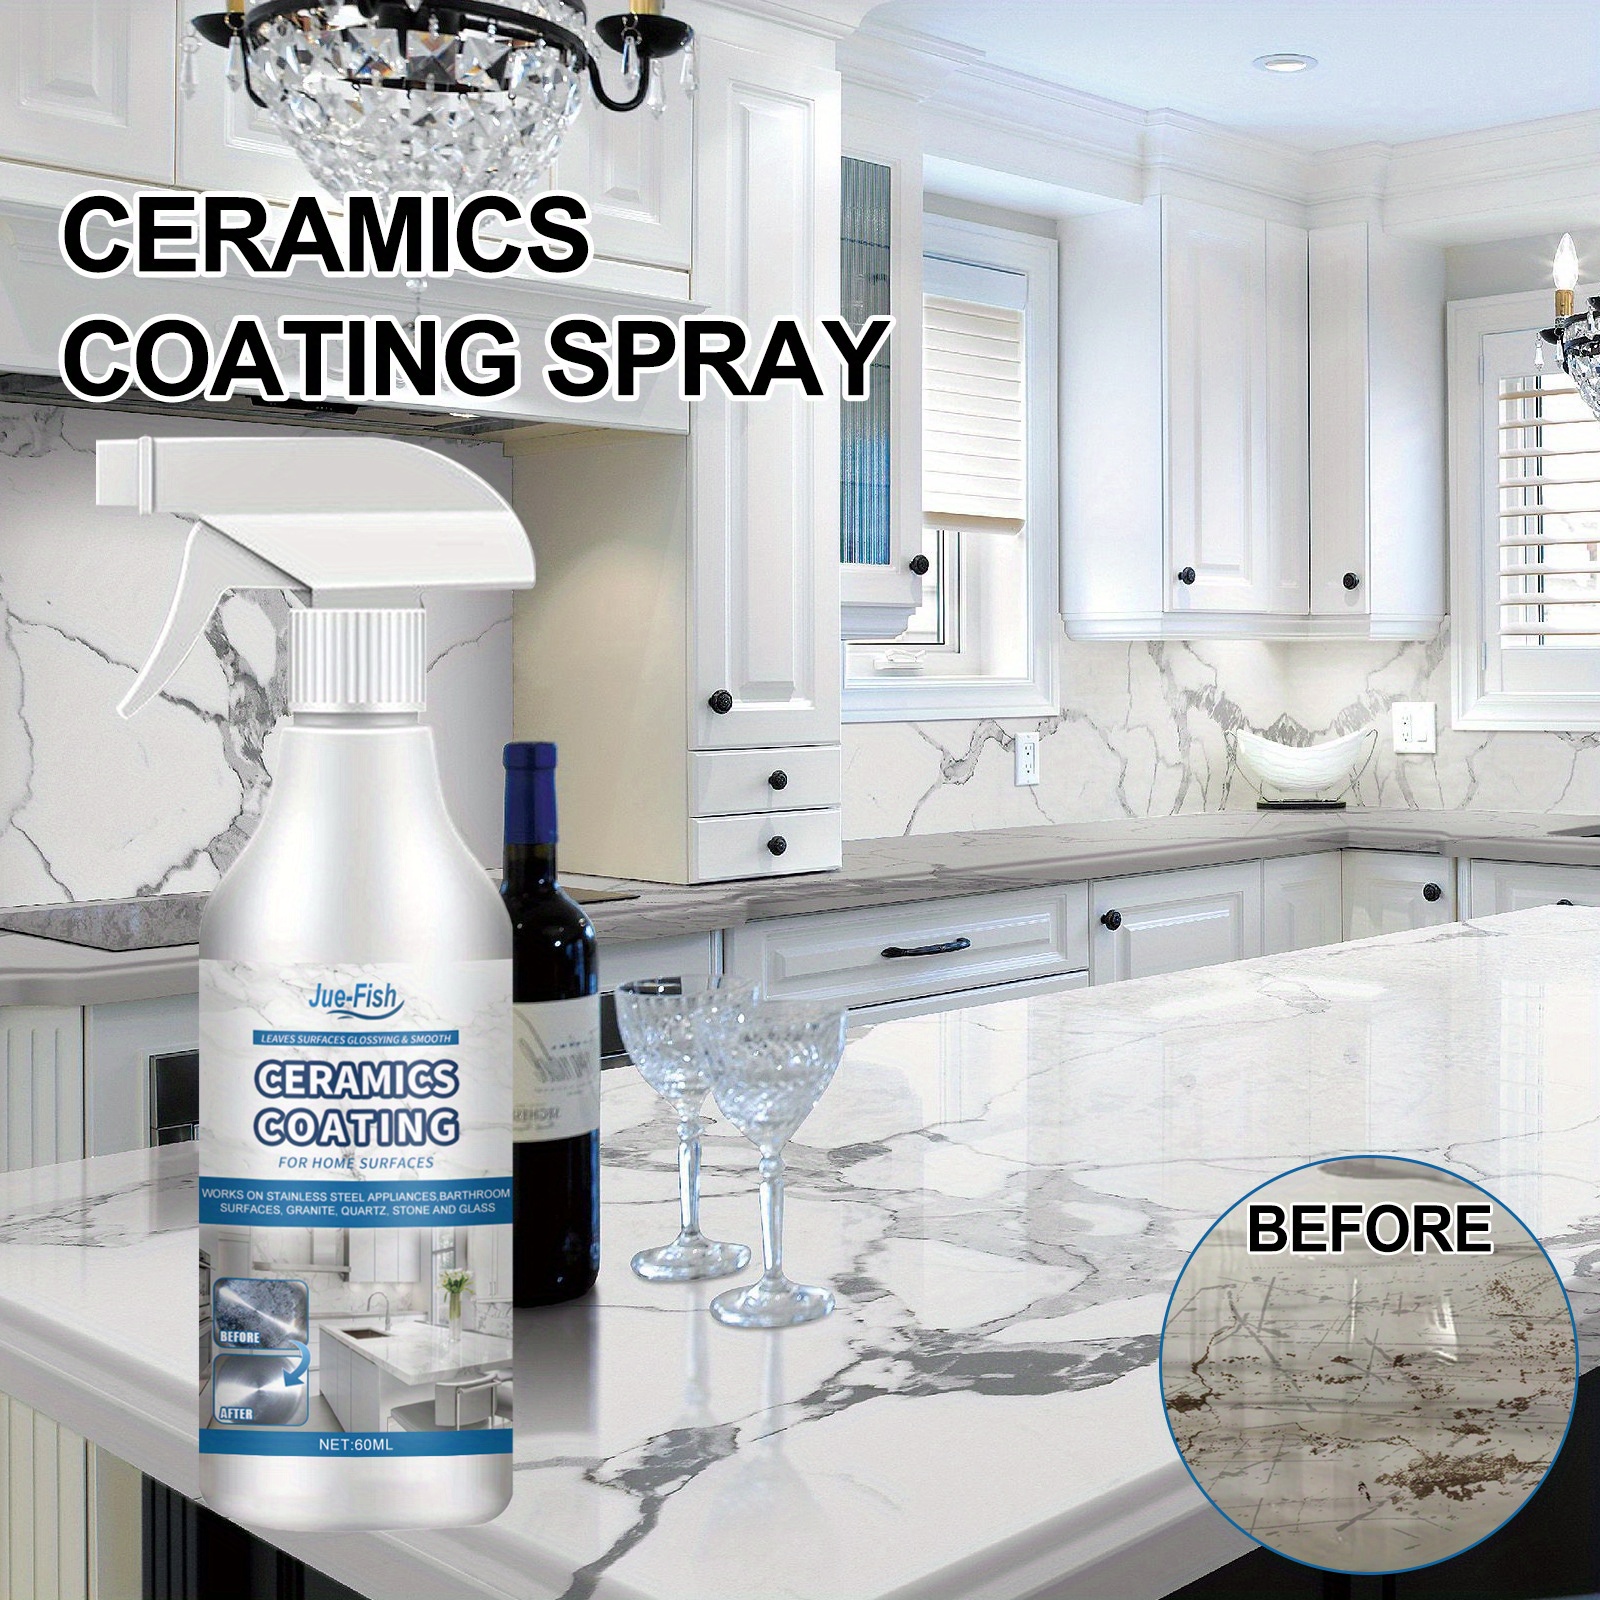 Surface Lock Home Ceramic Coating for Stainless Steel - Prevents Fingerprints on Appliances, Countertops and Any Hard Surface in Your Life - Made in